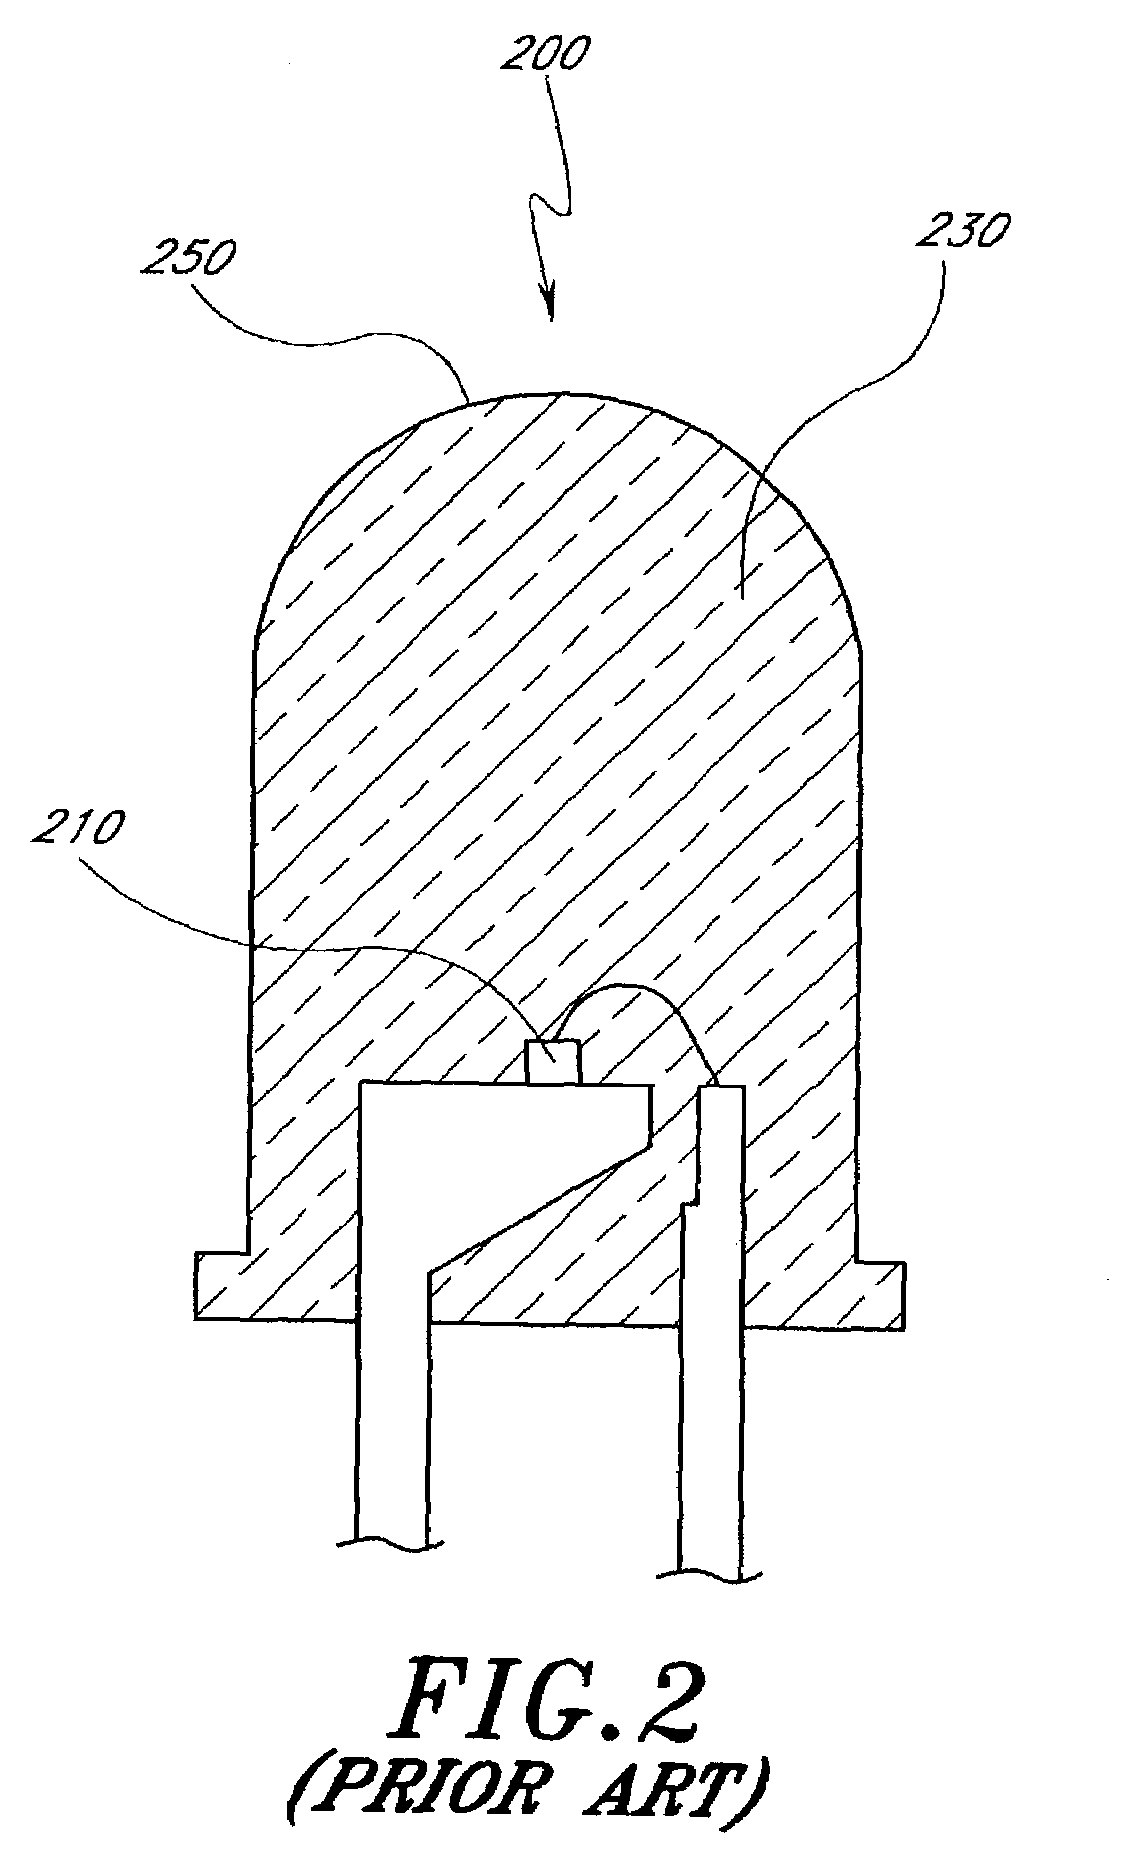 Optoelectronic element with a non-protruding lens